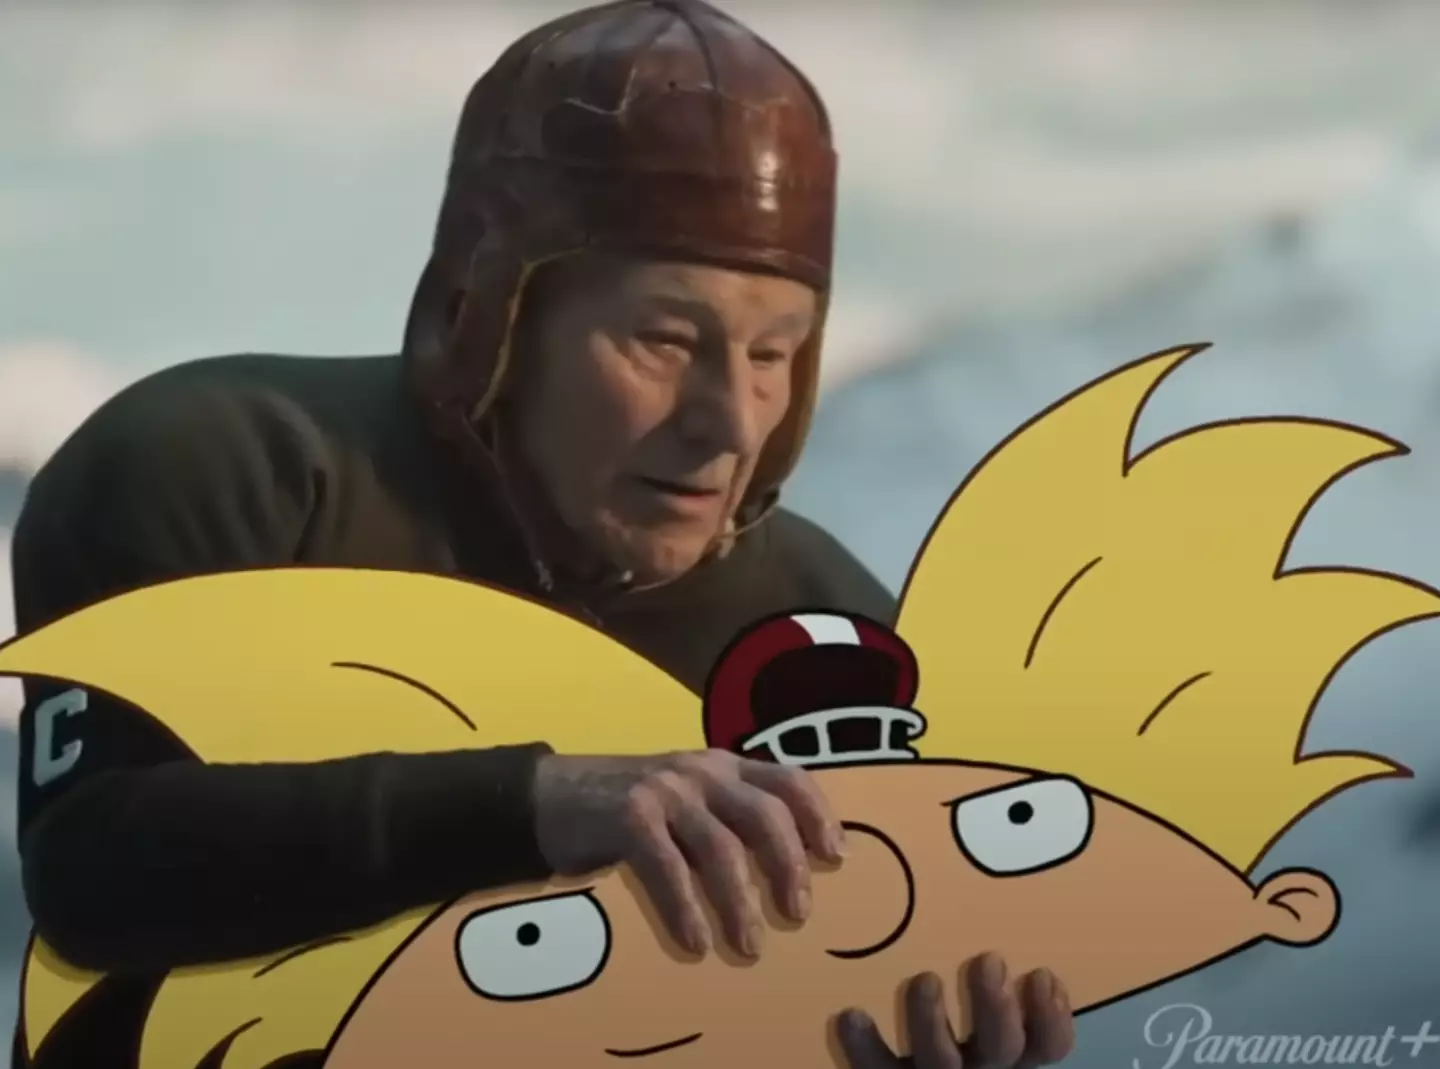 Just Patrick Stewart throwing Hey Arnold like an American football. Completely normal behaviour.